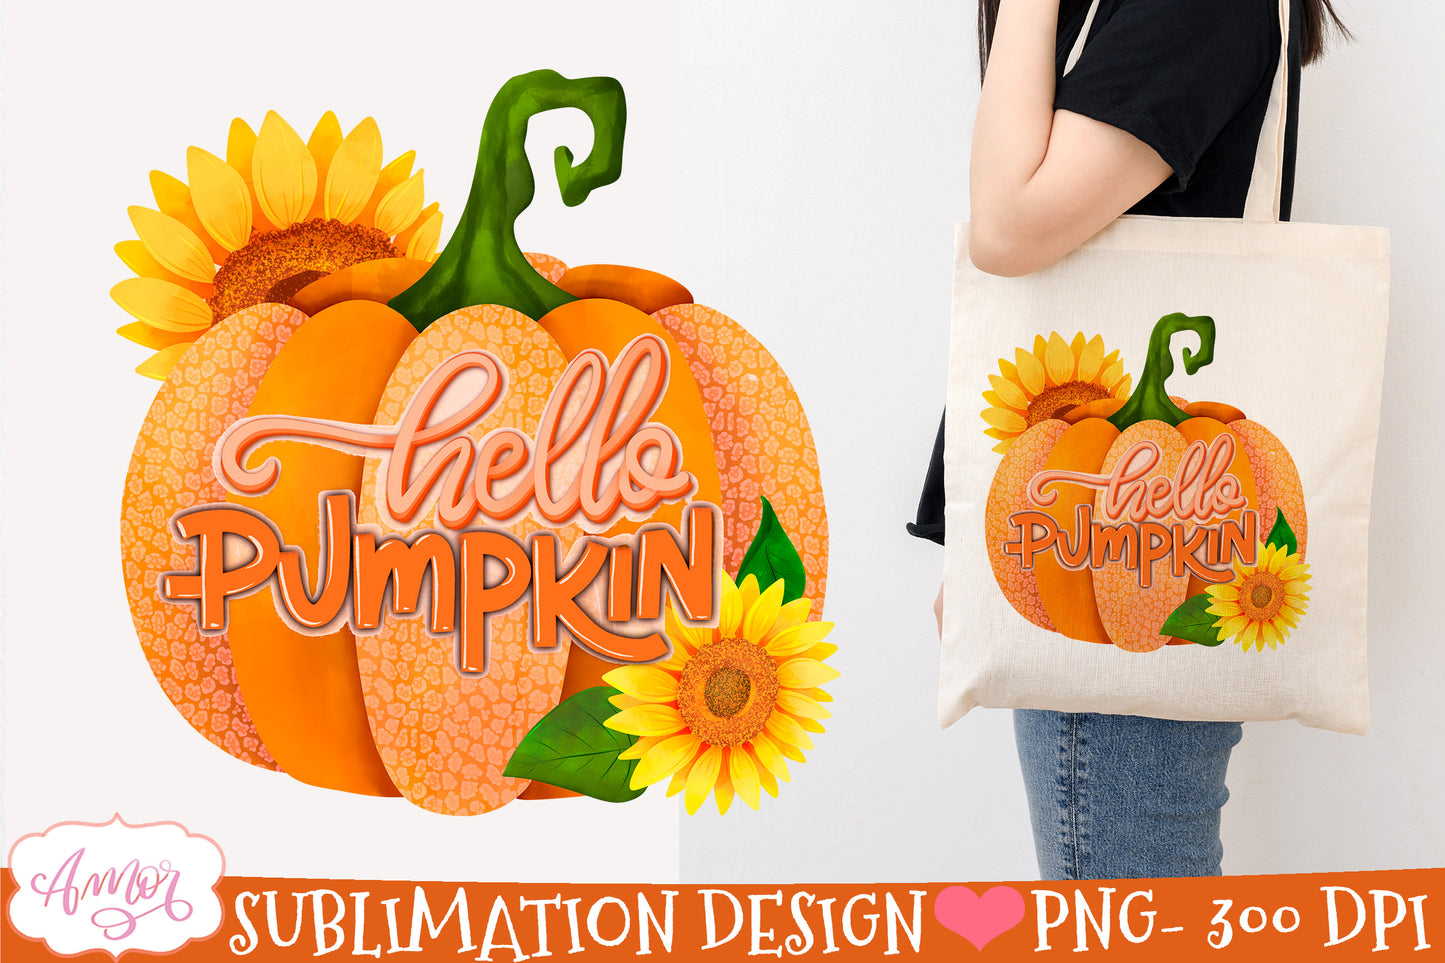 Hello pumpkin PNG for Sublimation |Pumpkin and sunflowers